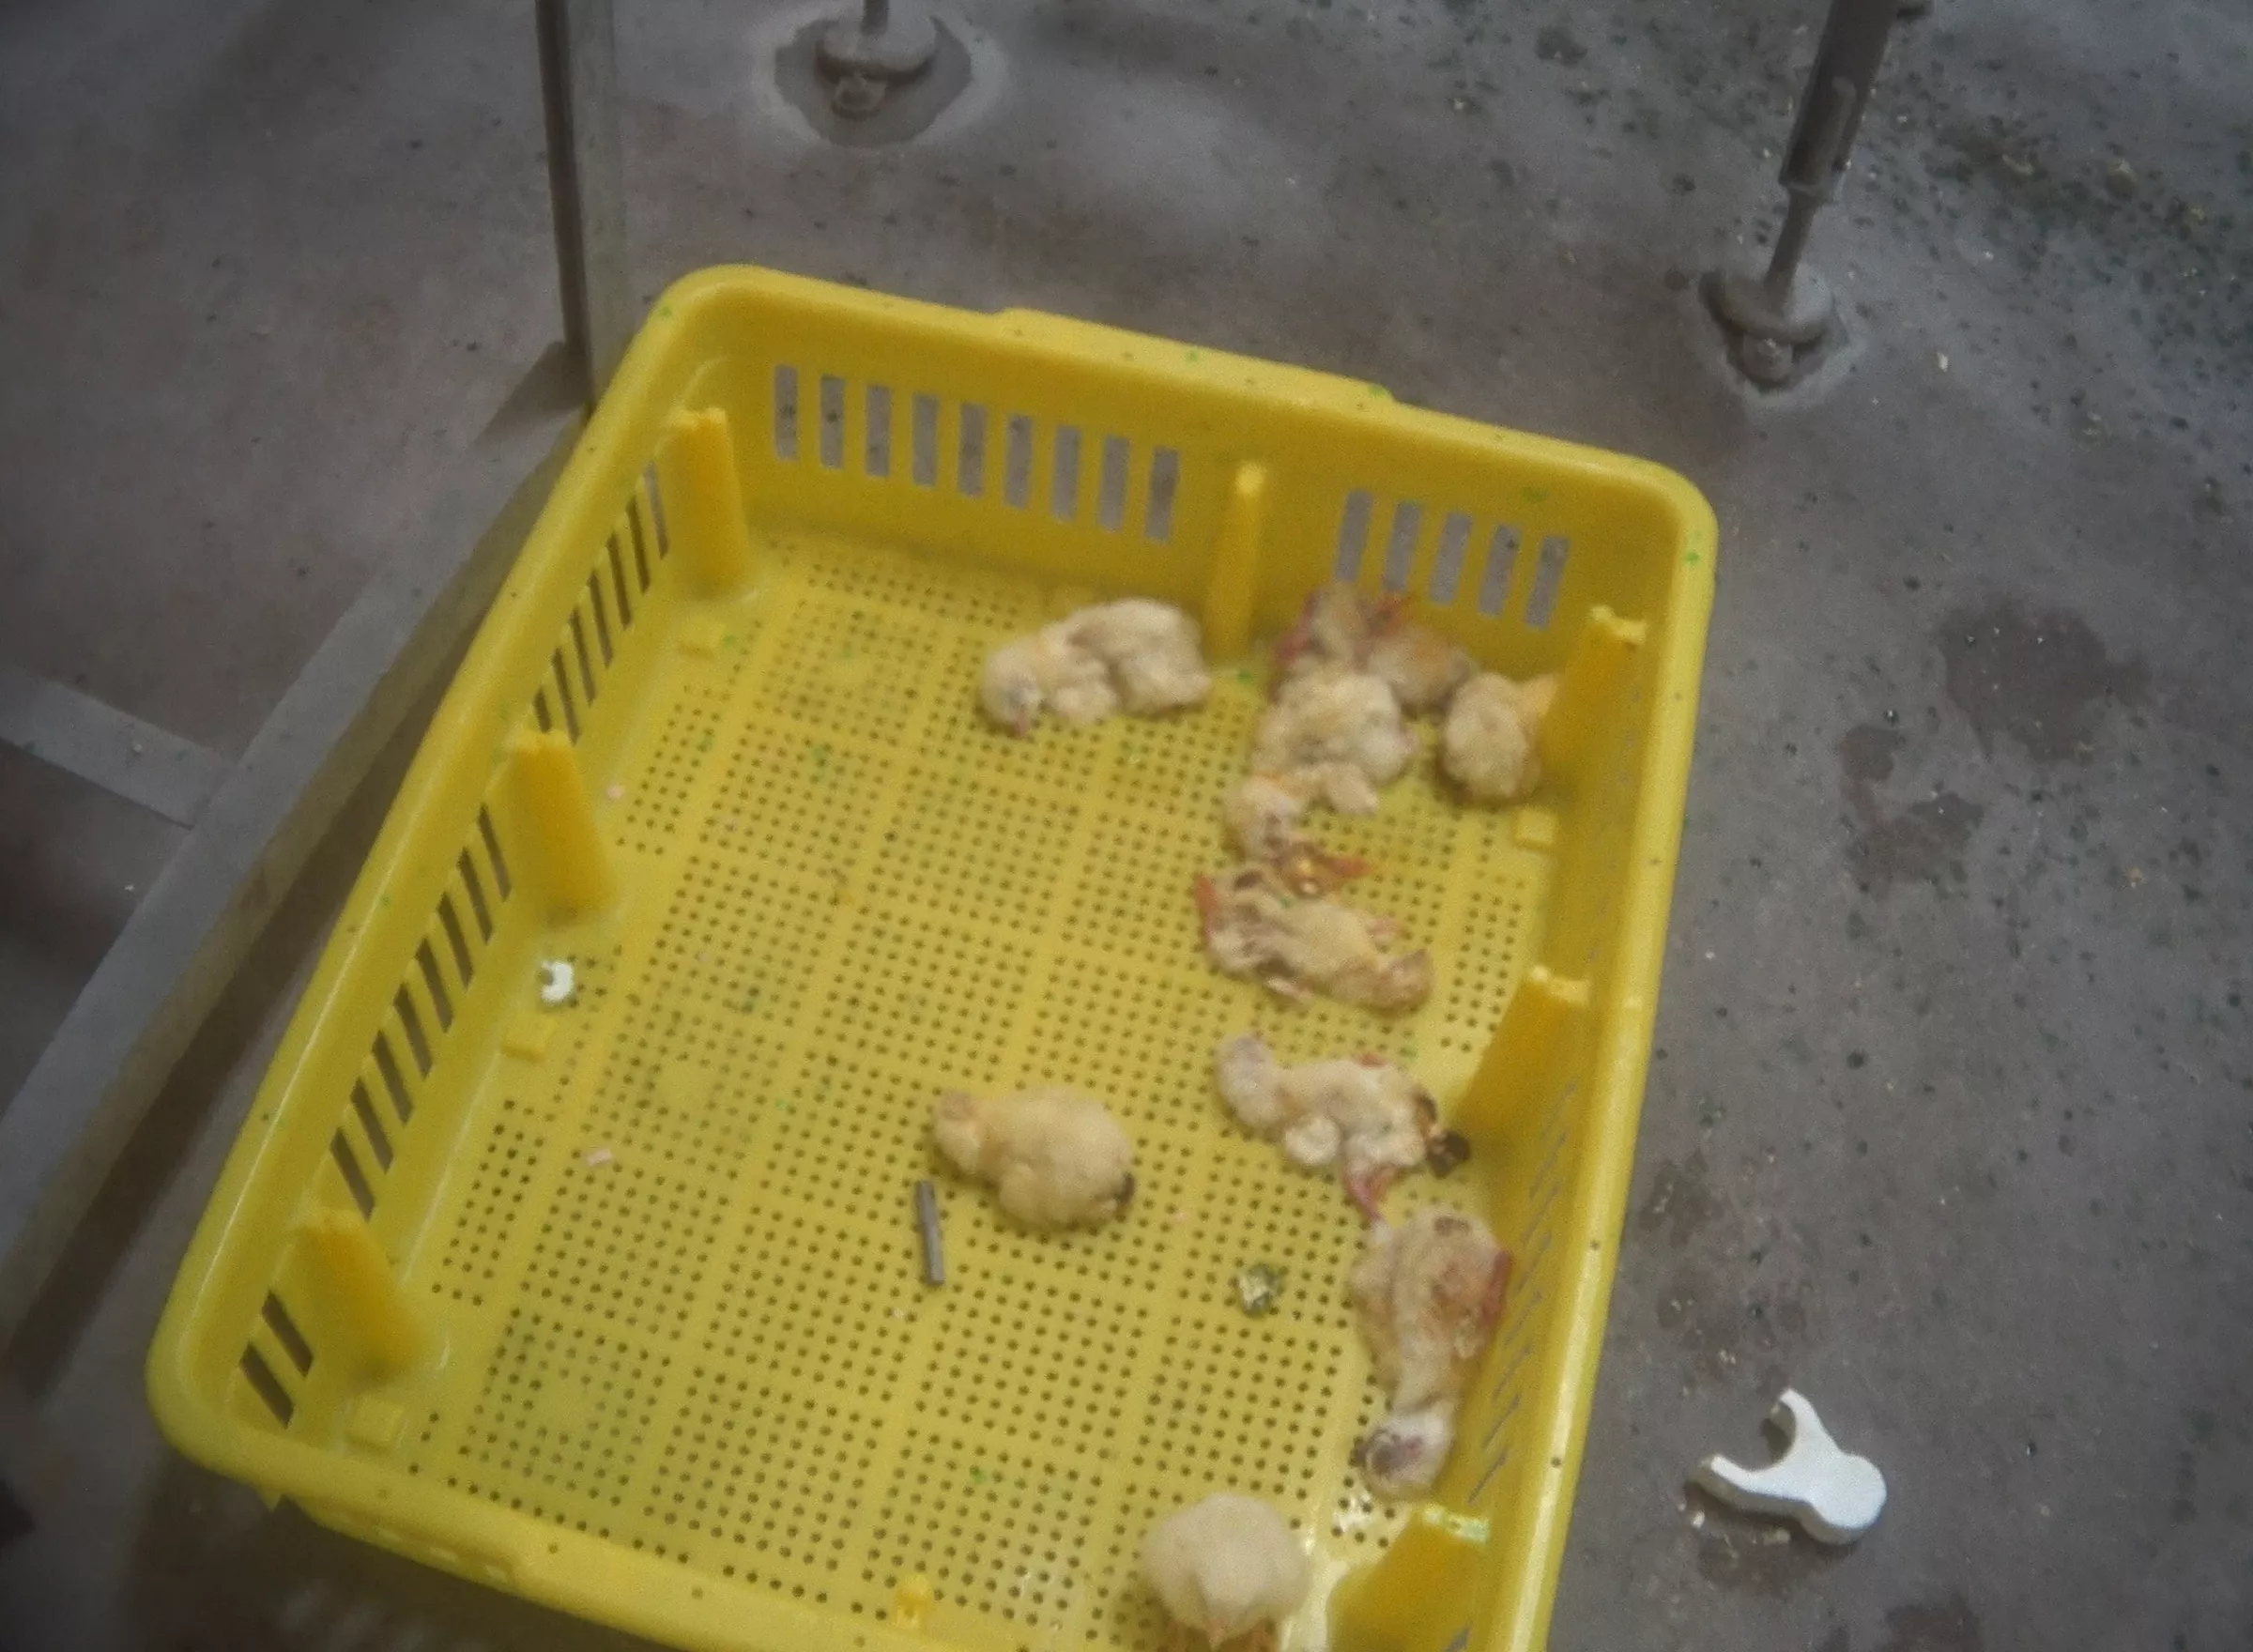 Discarded chicks in a tray.